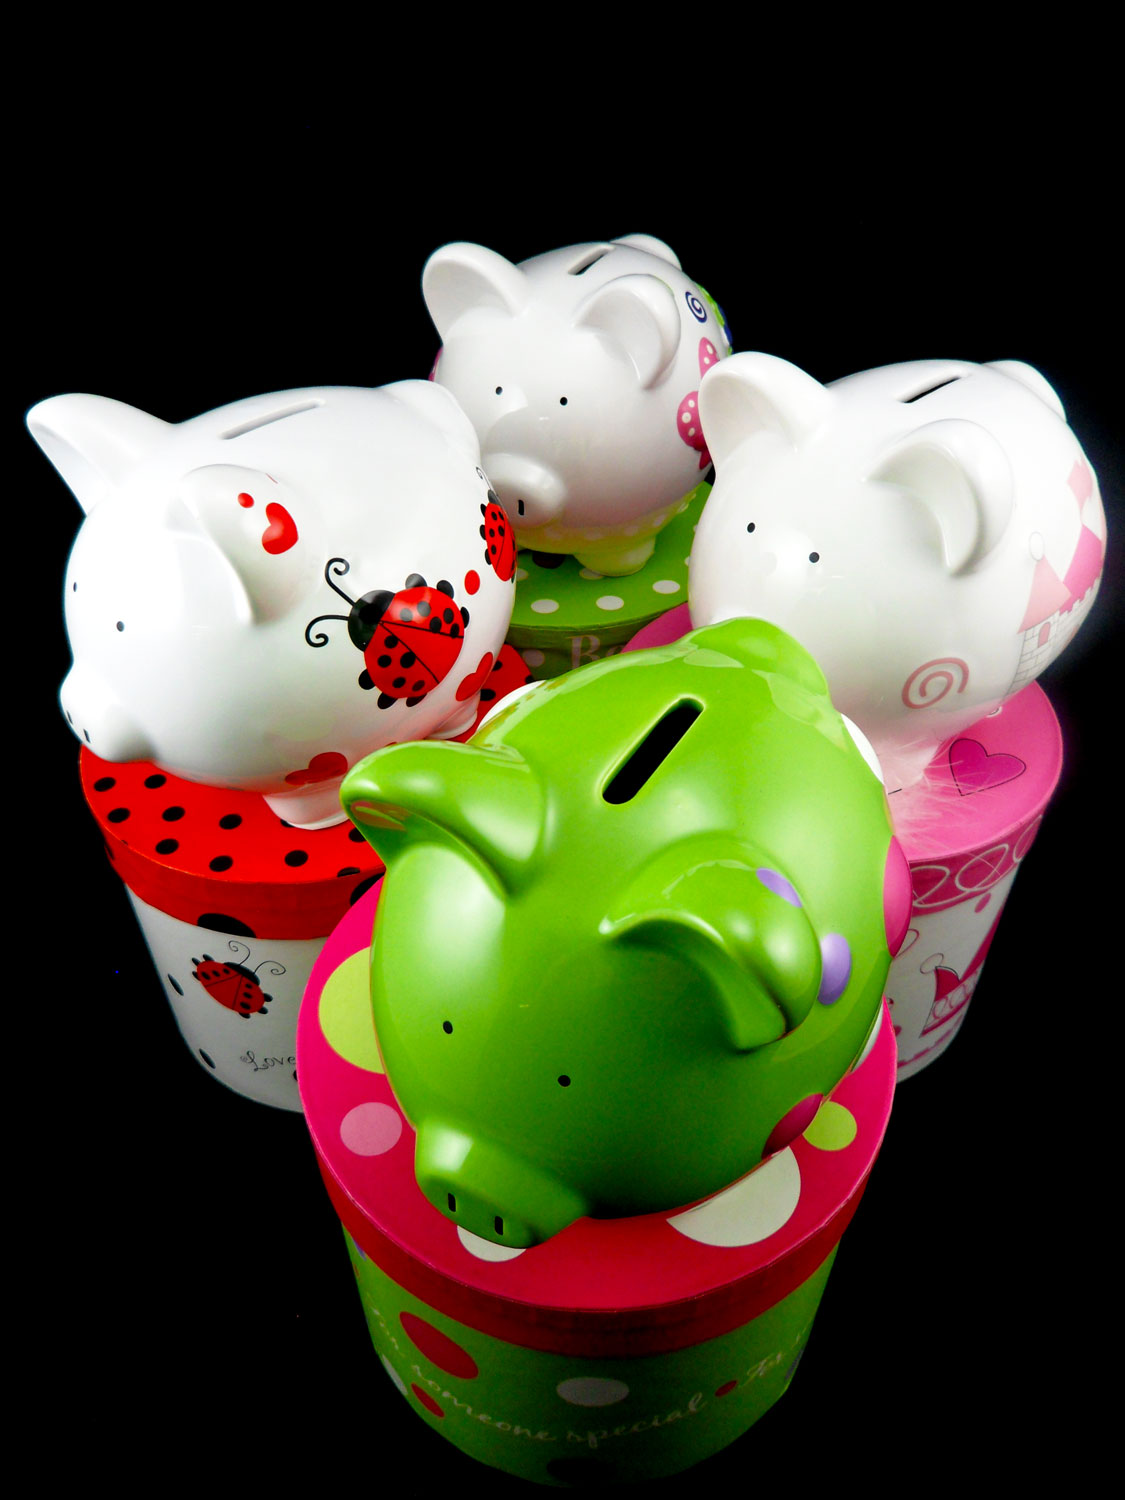 Four personalized piggy banks for girls: Green with polka dots, painted with pink castle, painted with ladybugs, and painted with butterflies | OrnamentShop.com